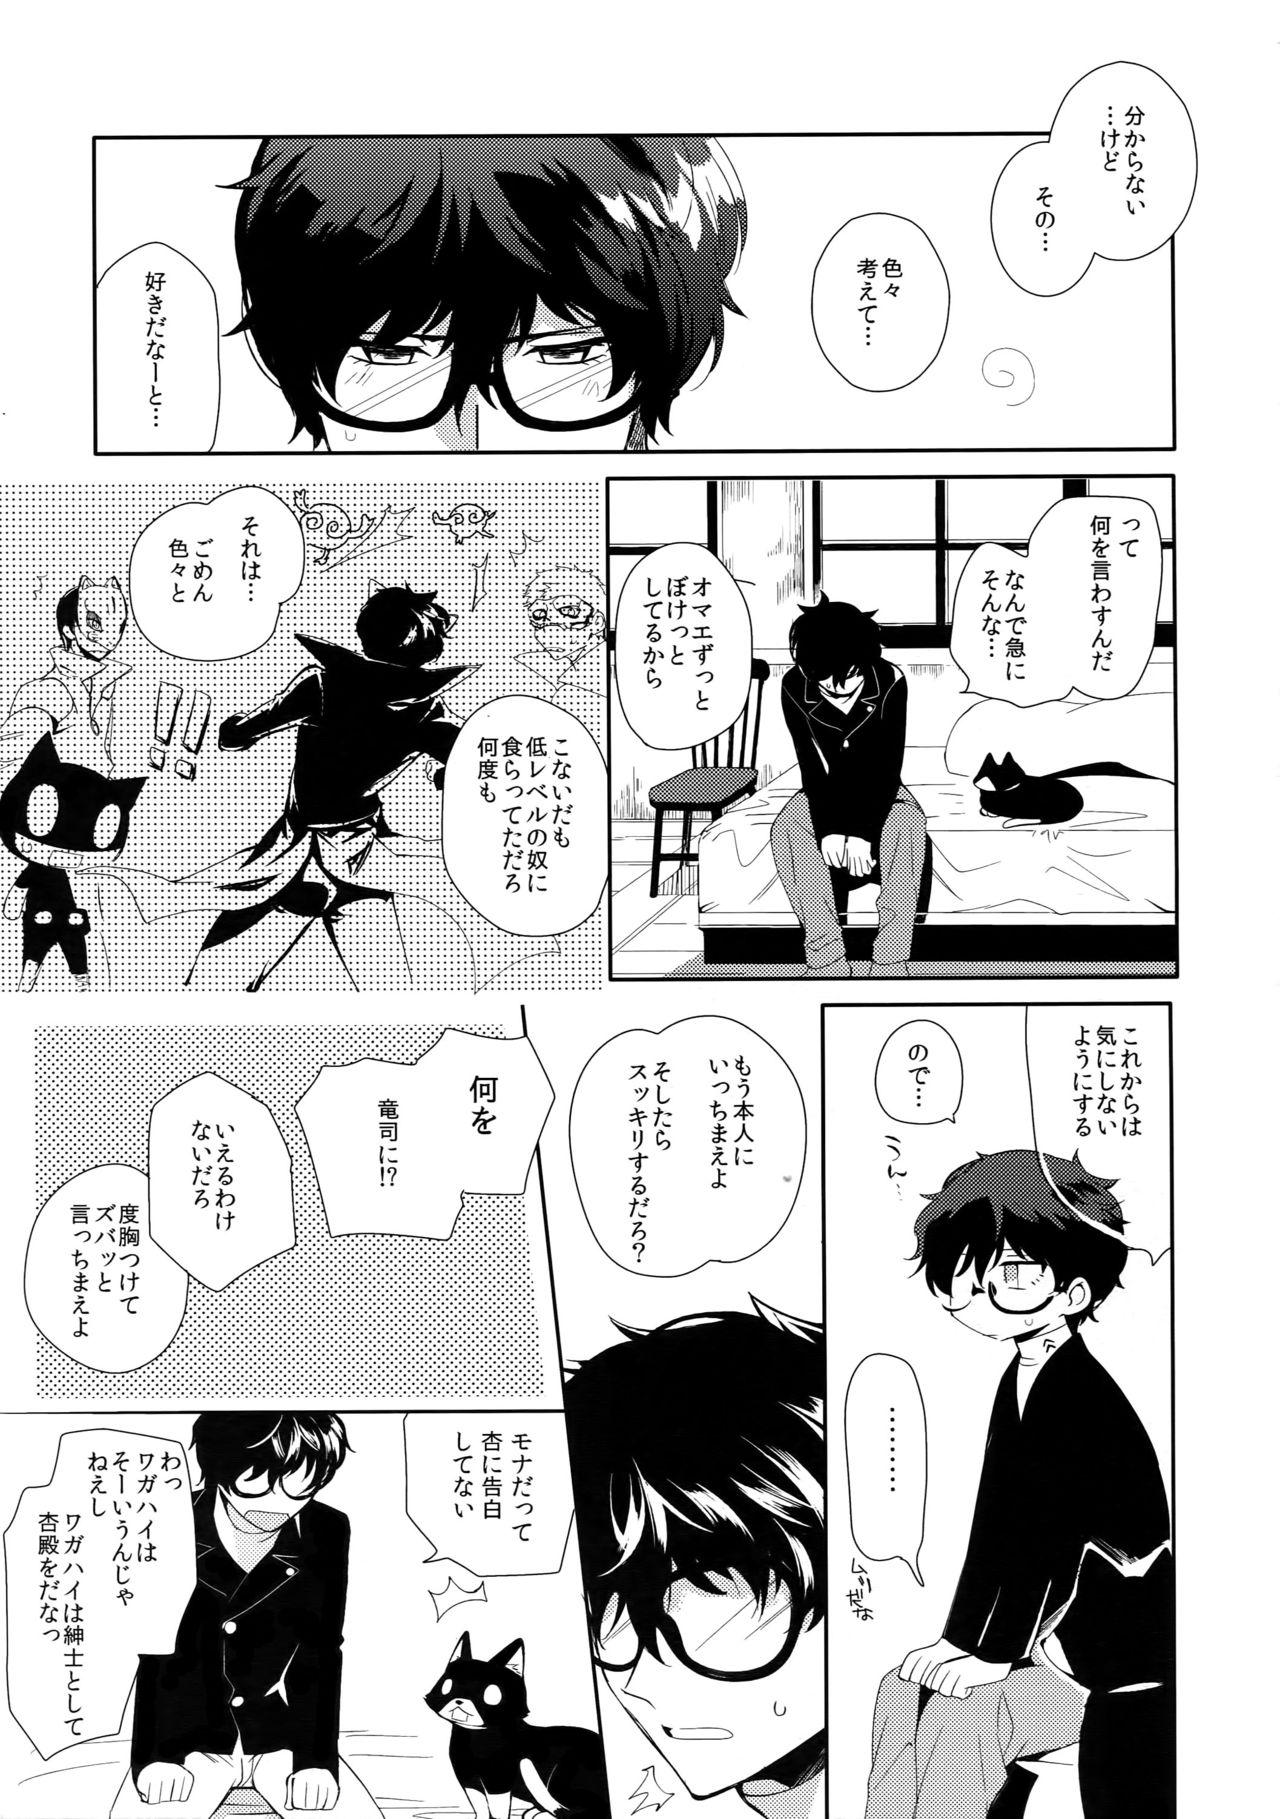 Hugetits You're My Hero - Persona 5 Storyline - Page 6